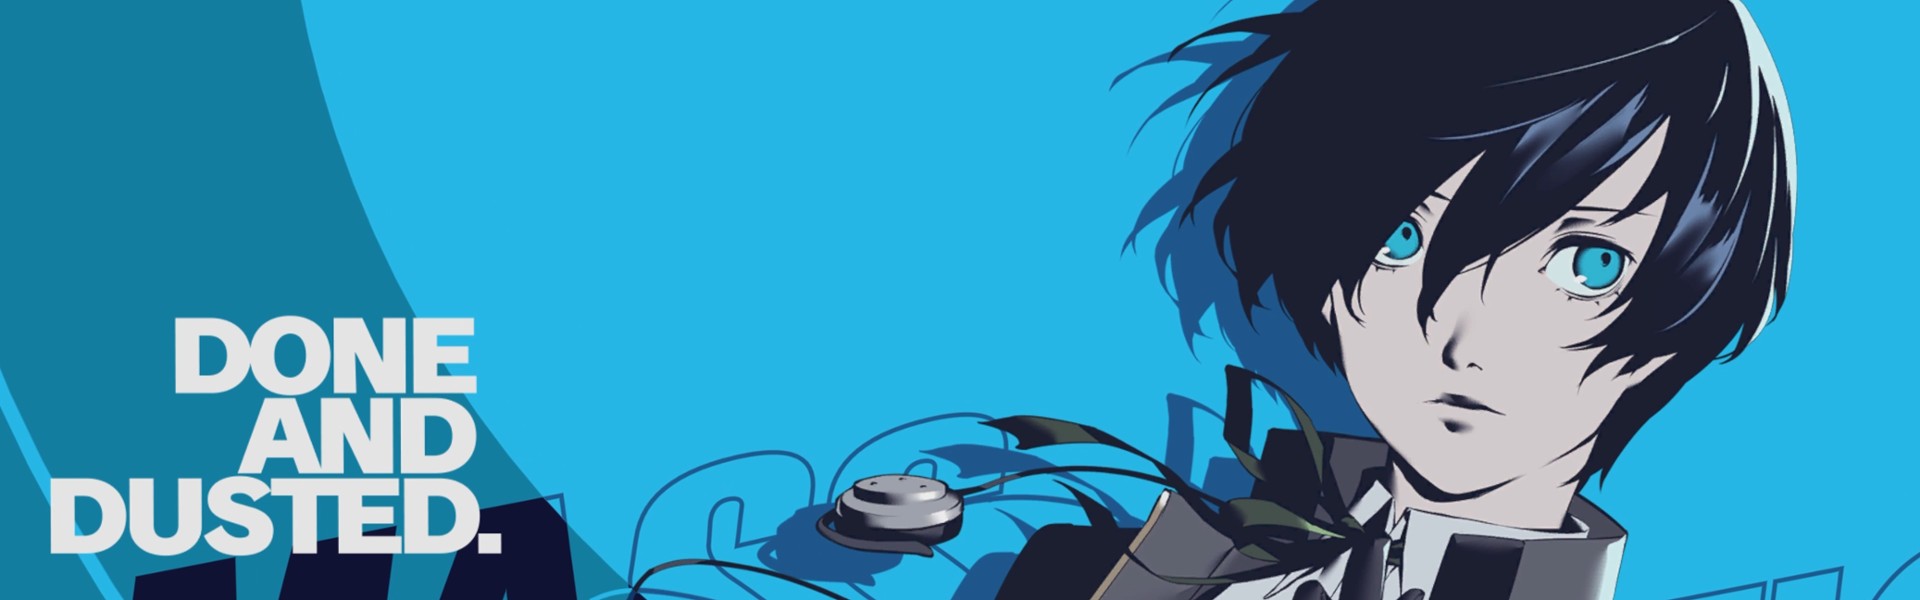 Everyone’s been waiting for this: Review of “Persona 3 Reload”